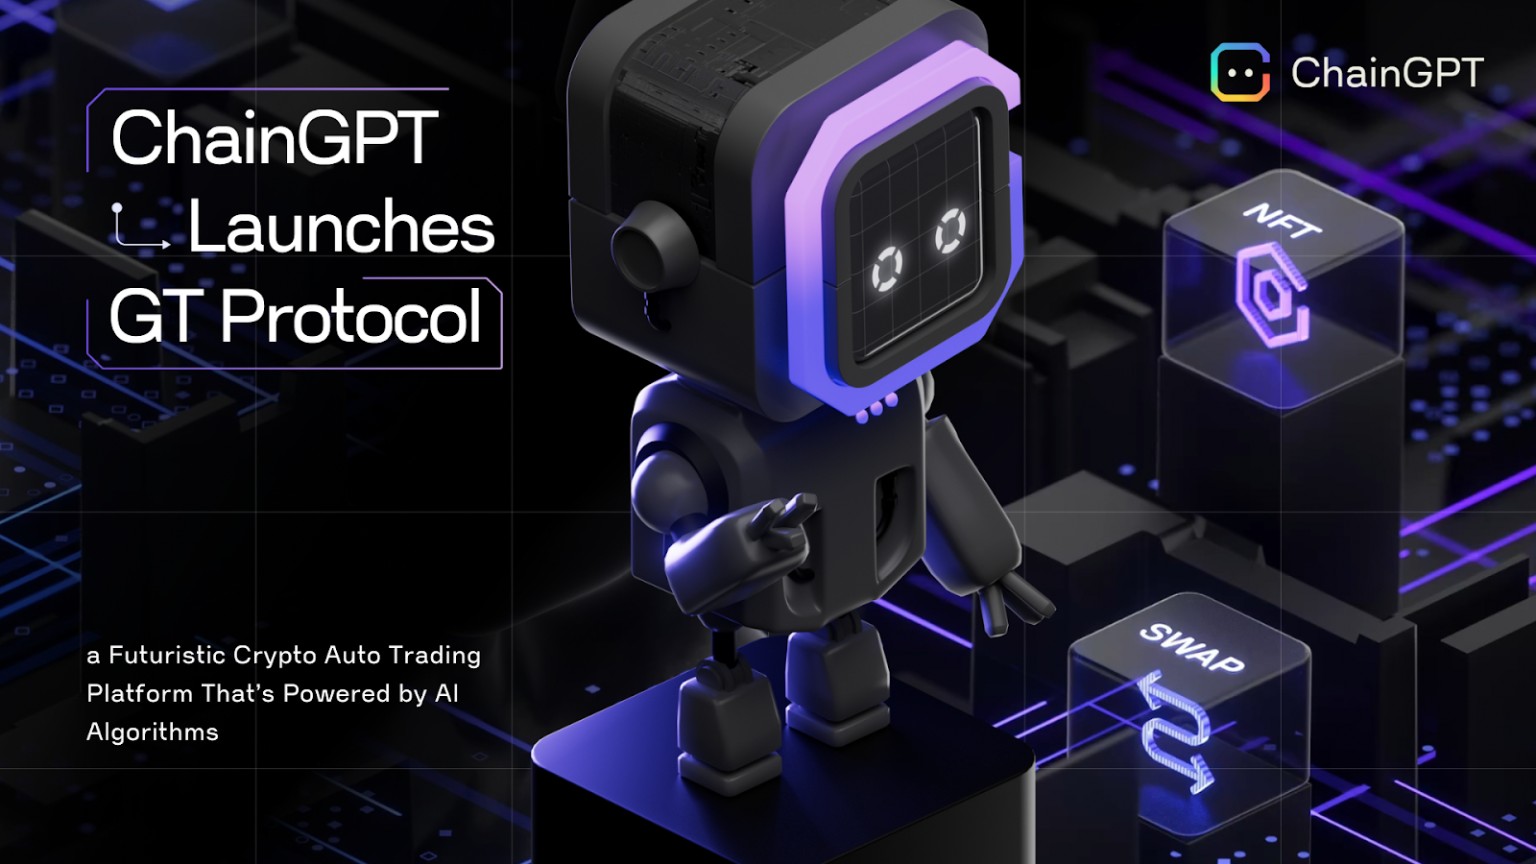 , ChainGPT facilitates the launch of the GT Protocol, bringing AI-powered auto-trading to crypto